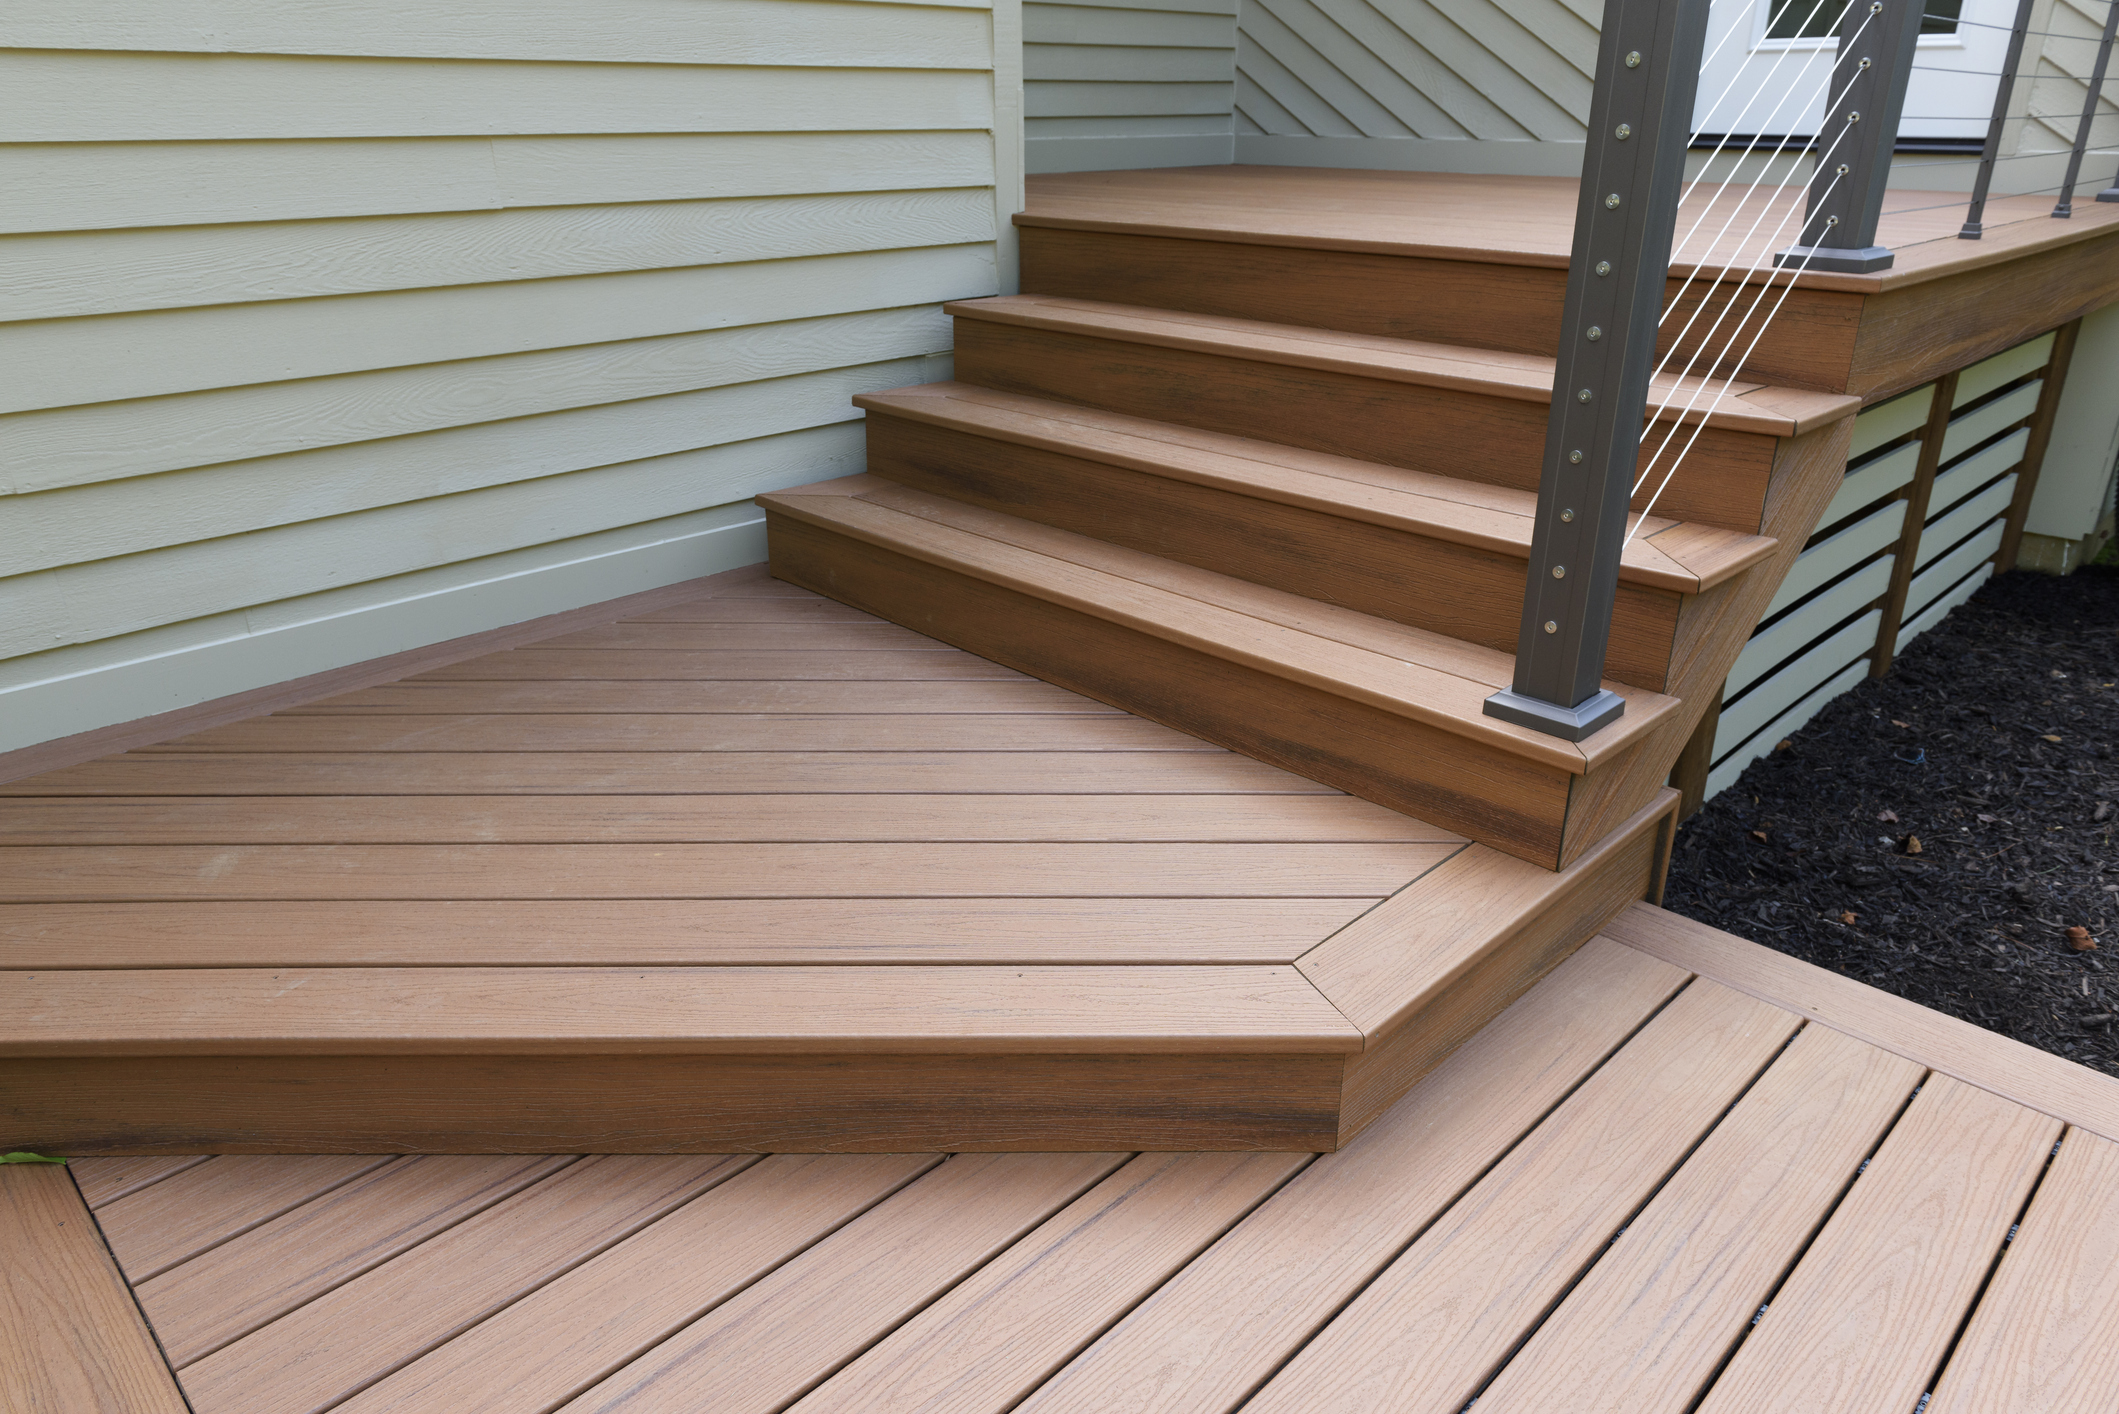 What is Bullnose Composite Decking?